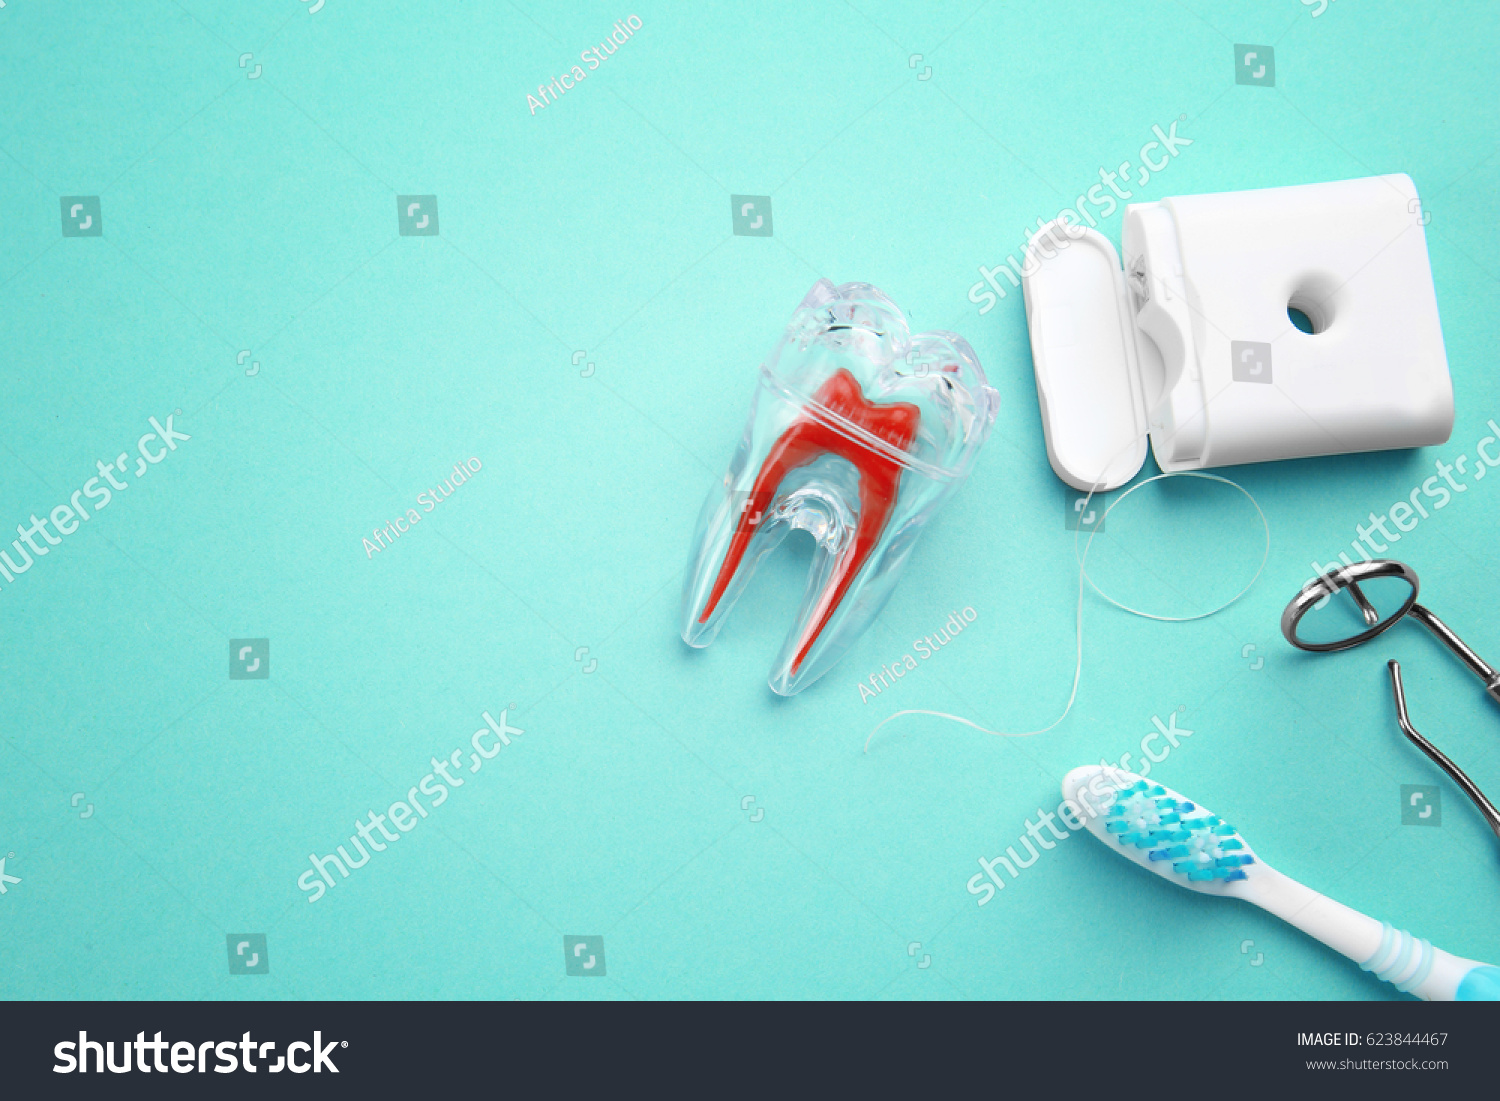 Download Toothbrush Plastic Tooth Mockup Dental Instruments Stock ...